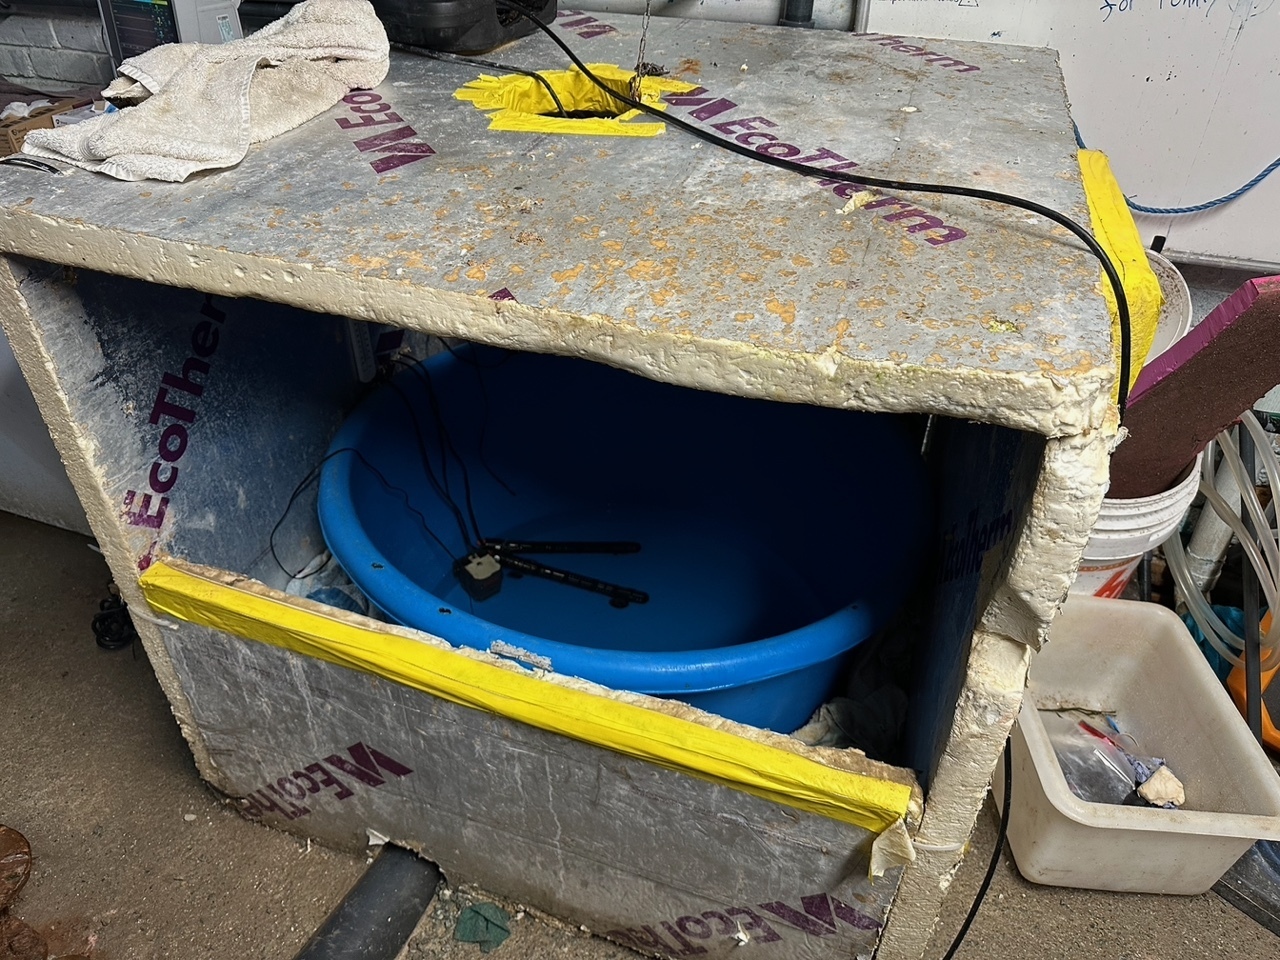 A makeshift incubator prepped for Rhossi. The Anglesey Sea Zoo needs funds for specialist turtle rescue equipment (Image Anglesey Sea Zoo)